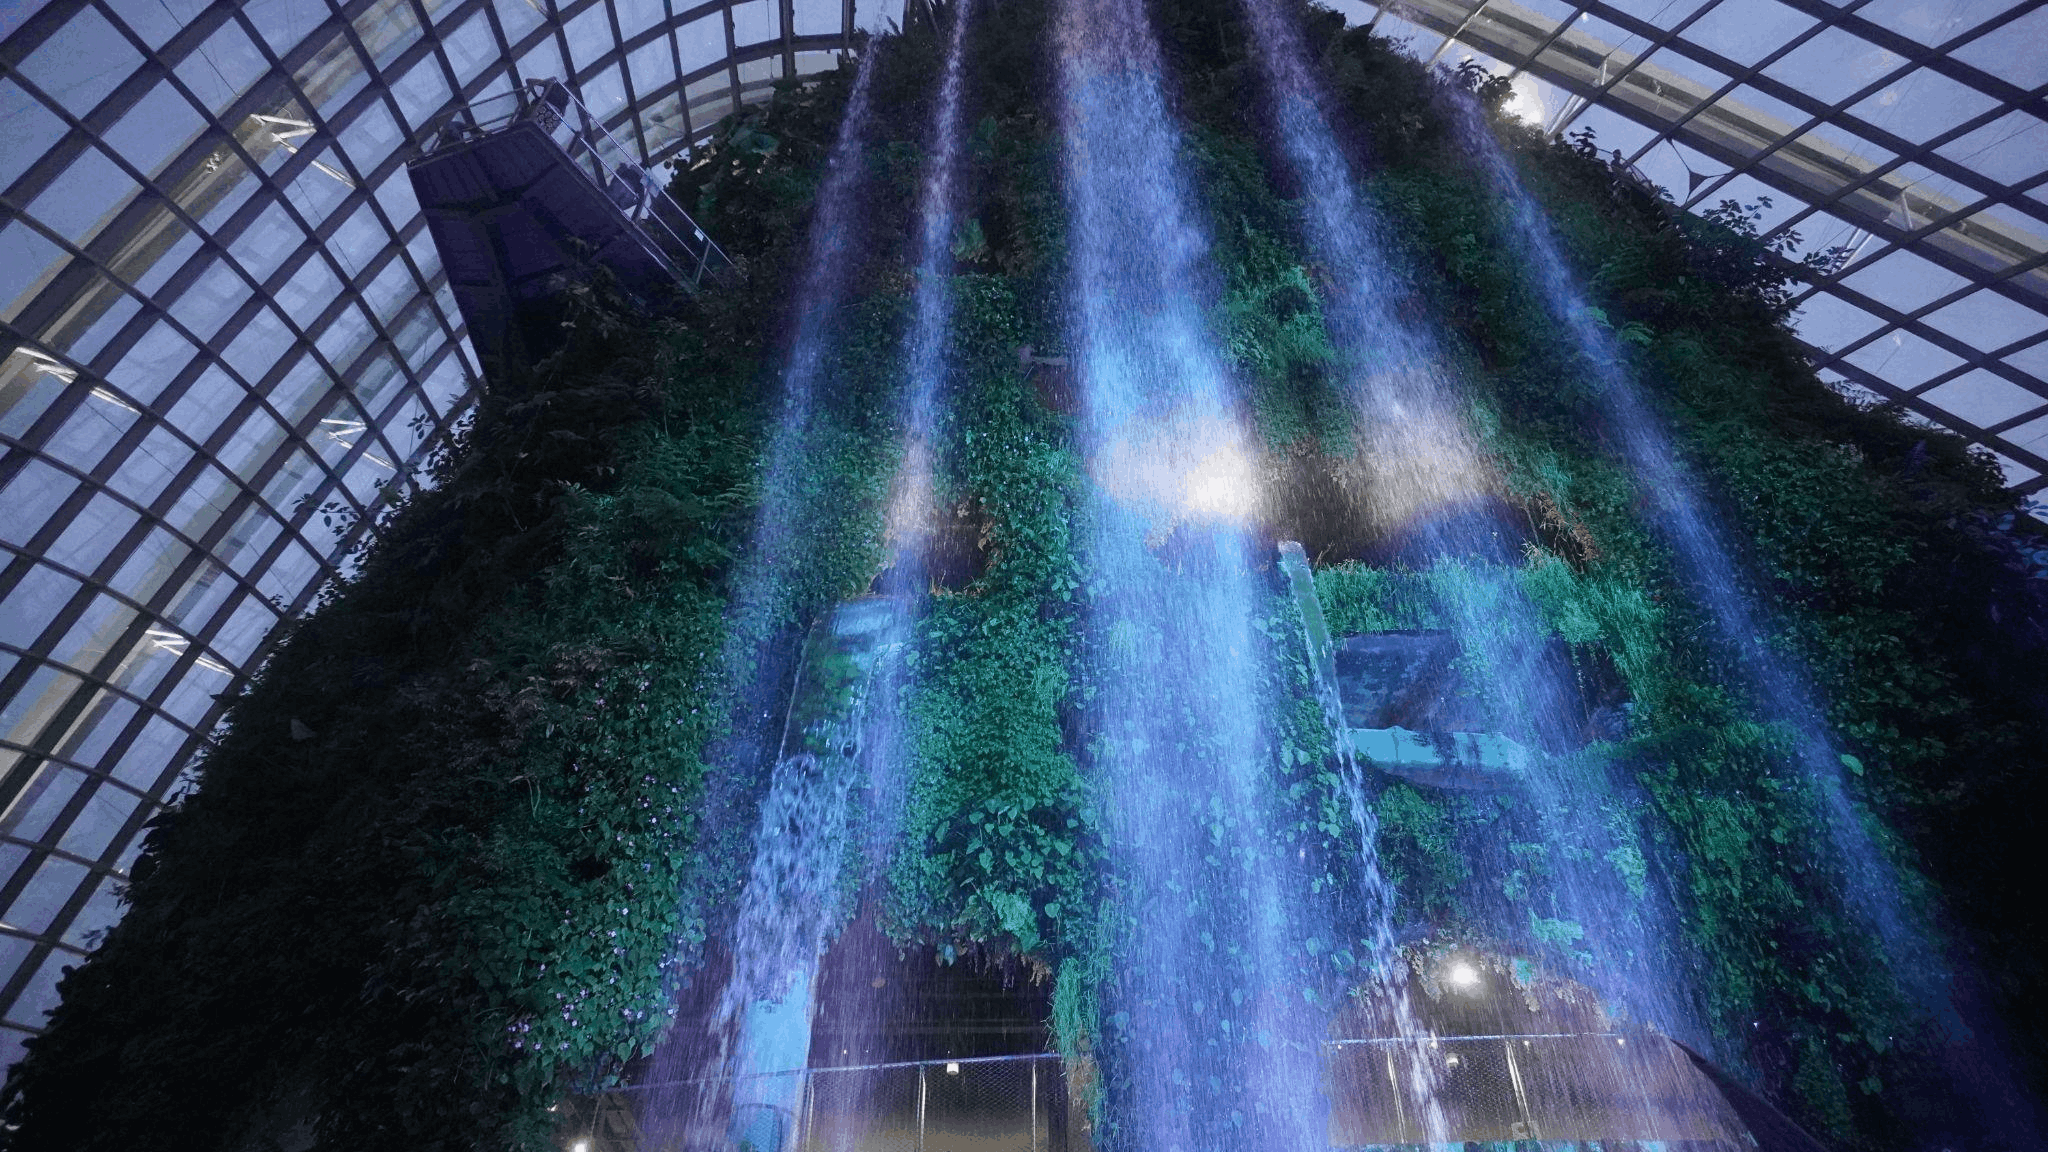 Avatar at Gardens by the Bay Singapore